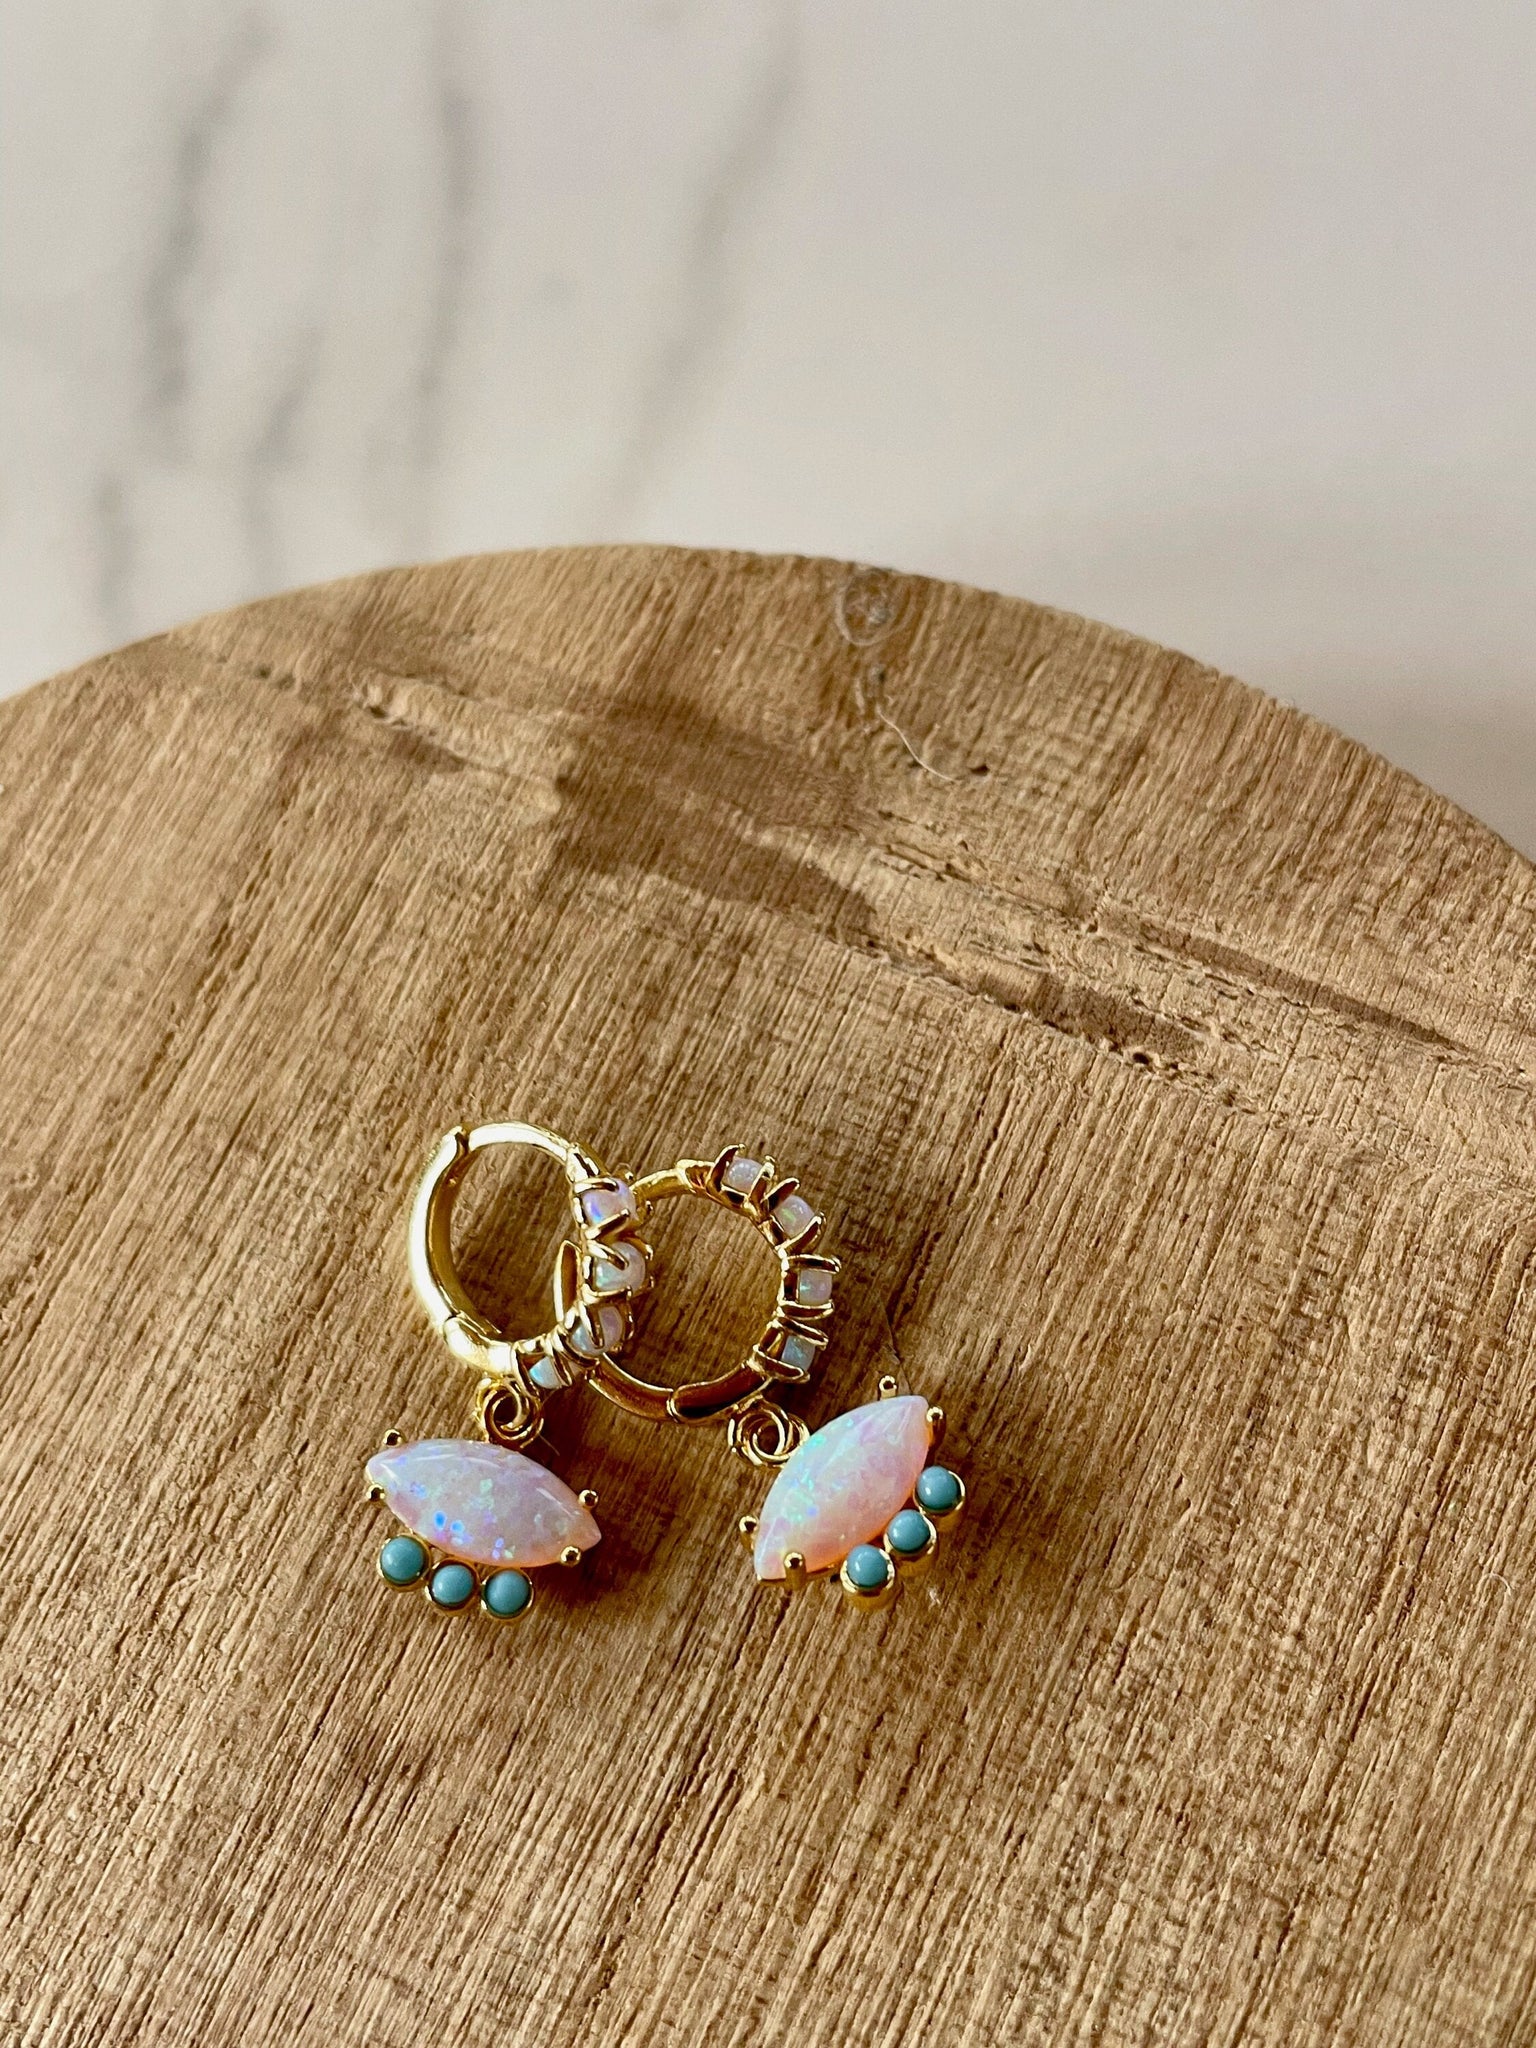 opal and turquoise huggie earrings, gold earrings, gold huggies, huggy, opal, opal birthstone, turquoise, gift, gift for her, summer jewelry